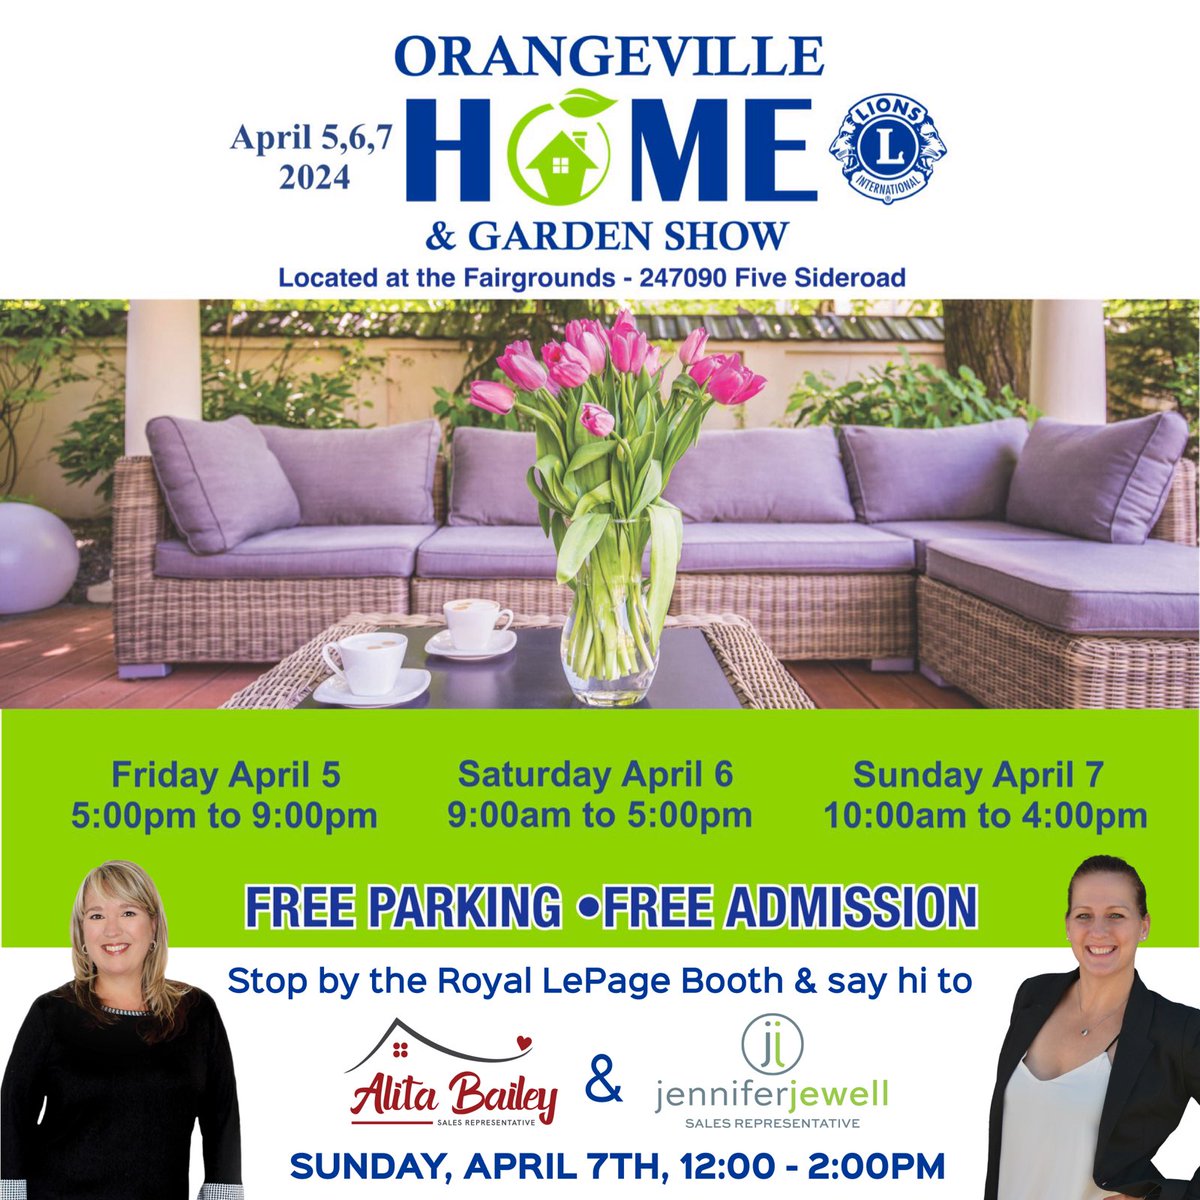 Pop on by say hi and pick up a pair of solar eclipse glasses. I will also be there Saturday April 6th 1-3pm.  Hope to see your there. 

#findyourgem #jenjewellrealestate #homeshow #orangevillehomeandgardenshow #dufferincounty